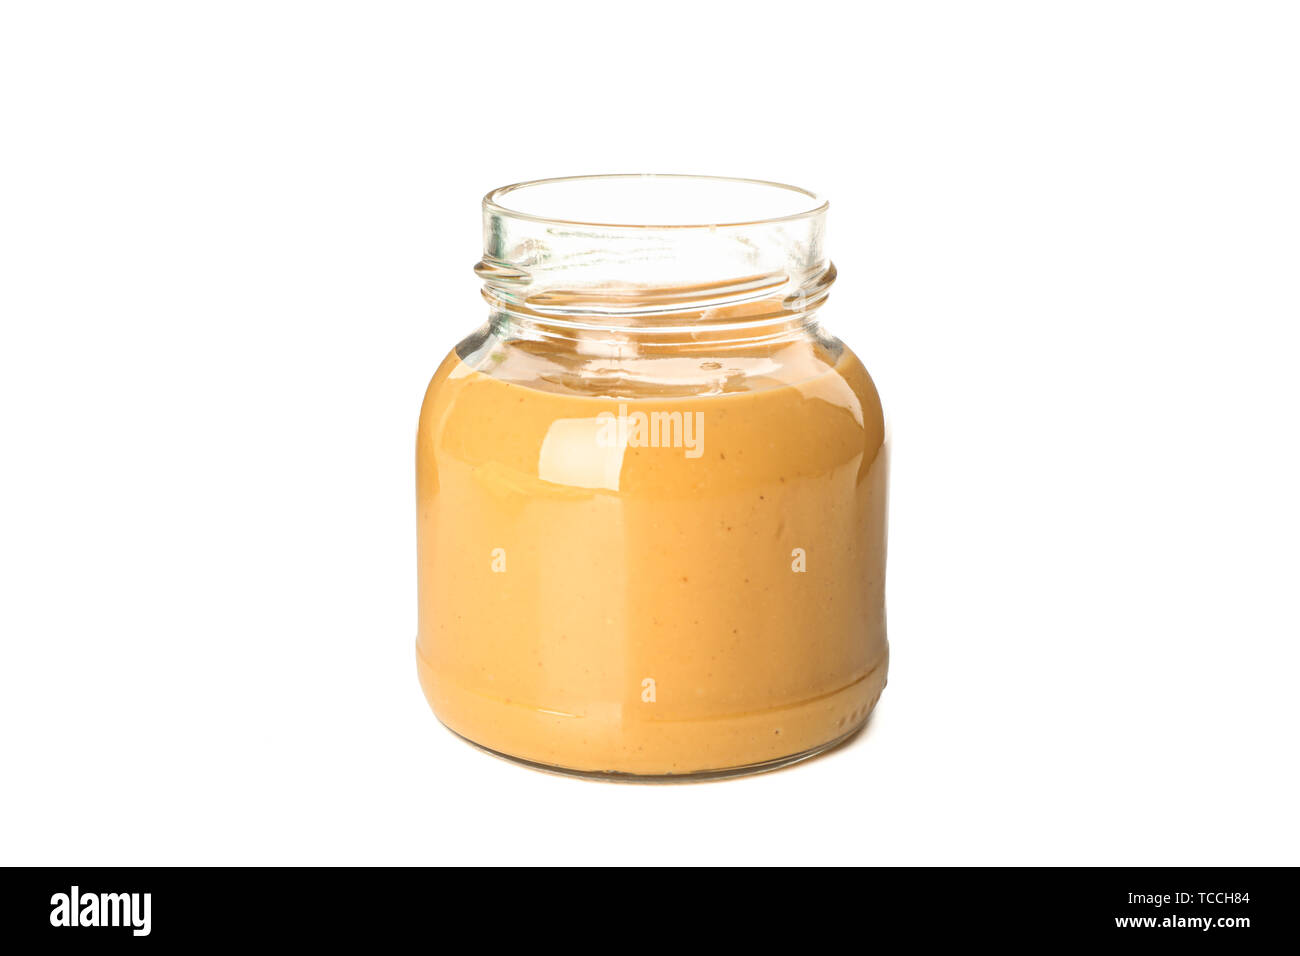 https://c8.alamy.com/comp/TCCH84/creamy-peanut-butter-in-glass-jar-isolated-on-white-background-a-traditional-product-of-american-cuisine-TCCH84.jpg